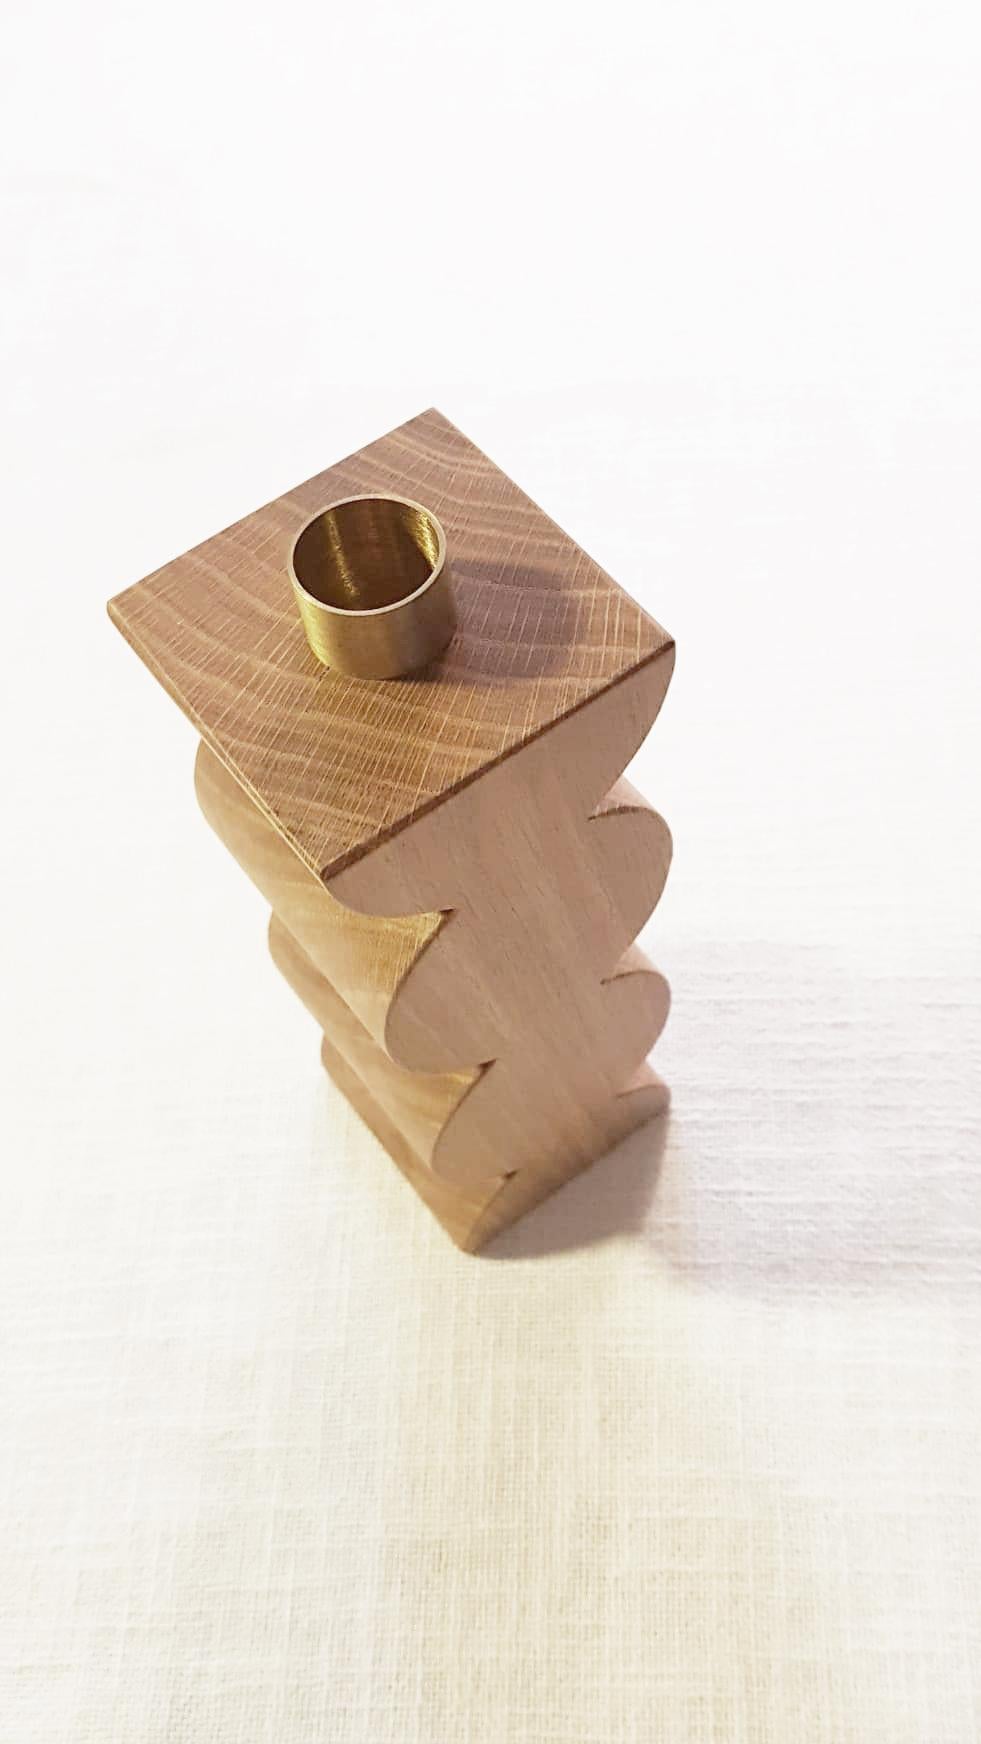 Italian Constantin I Candleholder in Solid Oak and Brass Minimalist Design with Circles For Sale